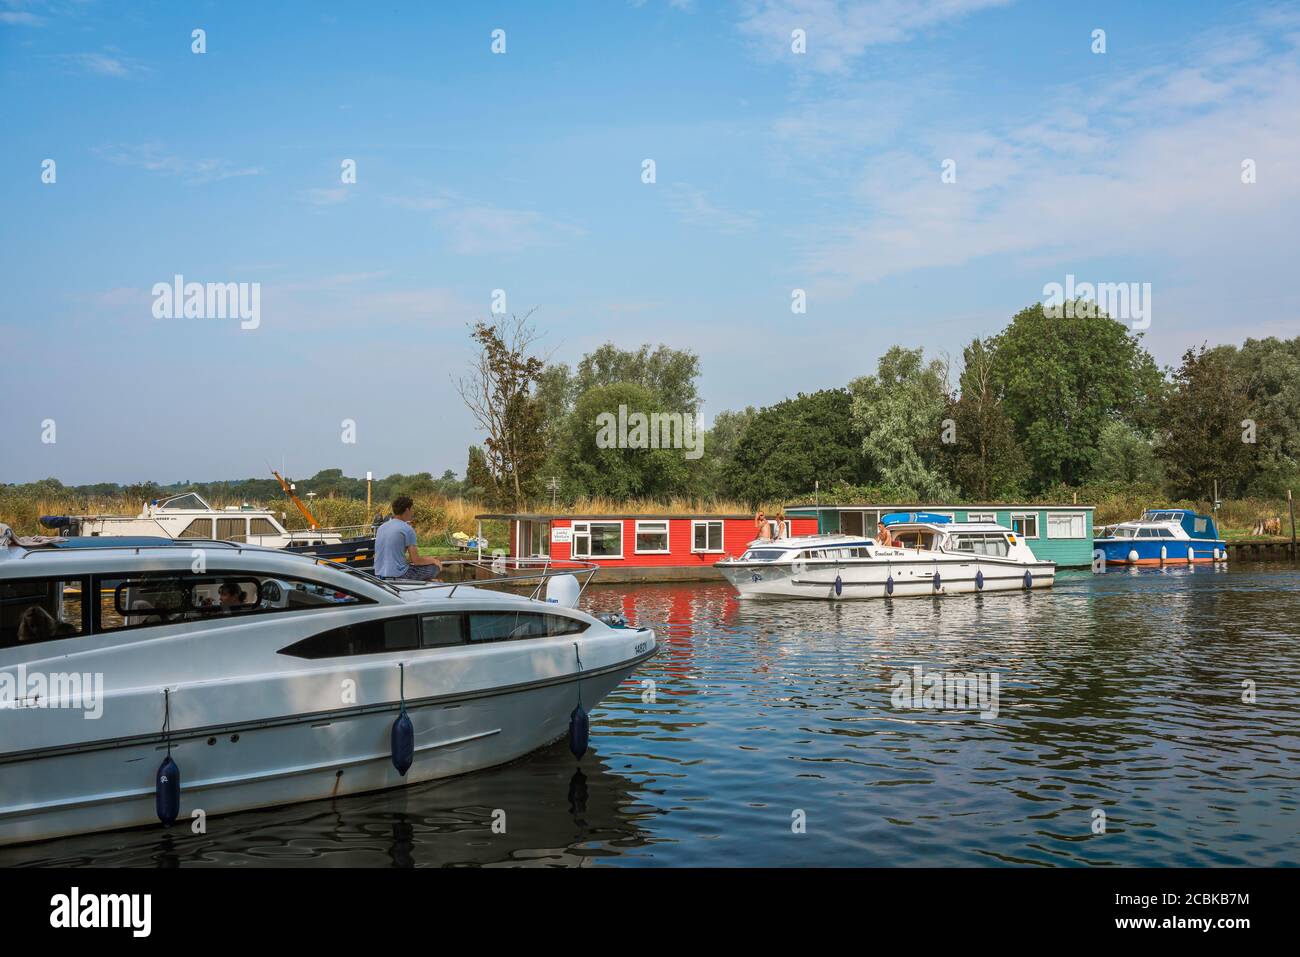 Sailing vacation, view in summer of people sailing pleasure boats along the River Waveney on the Norfolk Suffolk border in East Anglia, England, UK Stock Photo